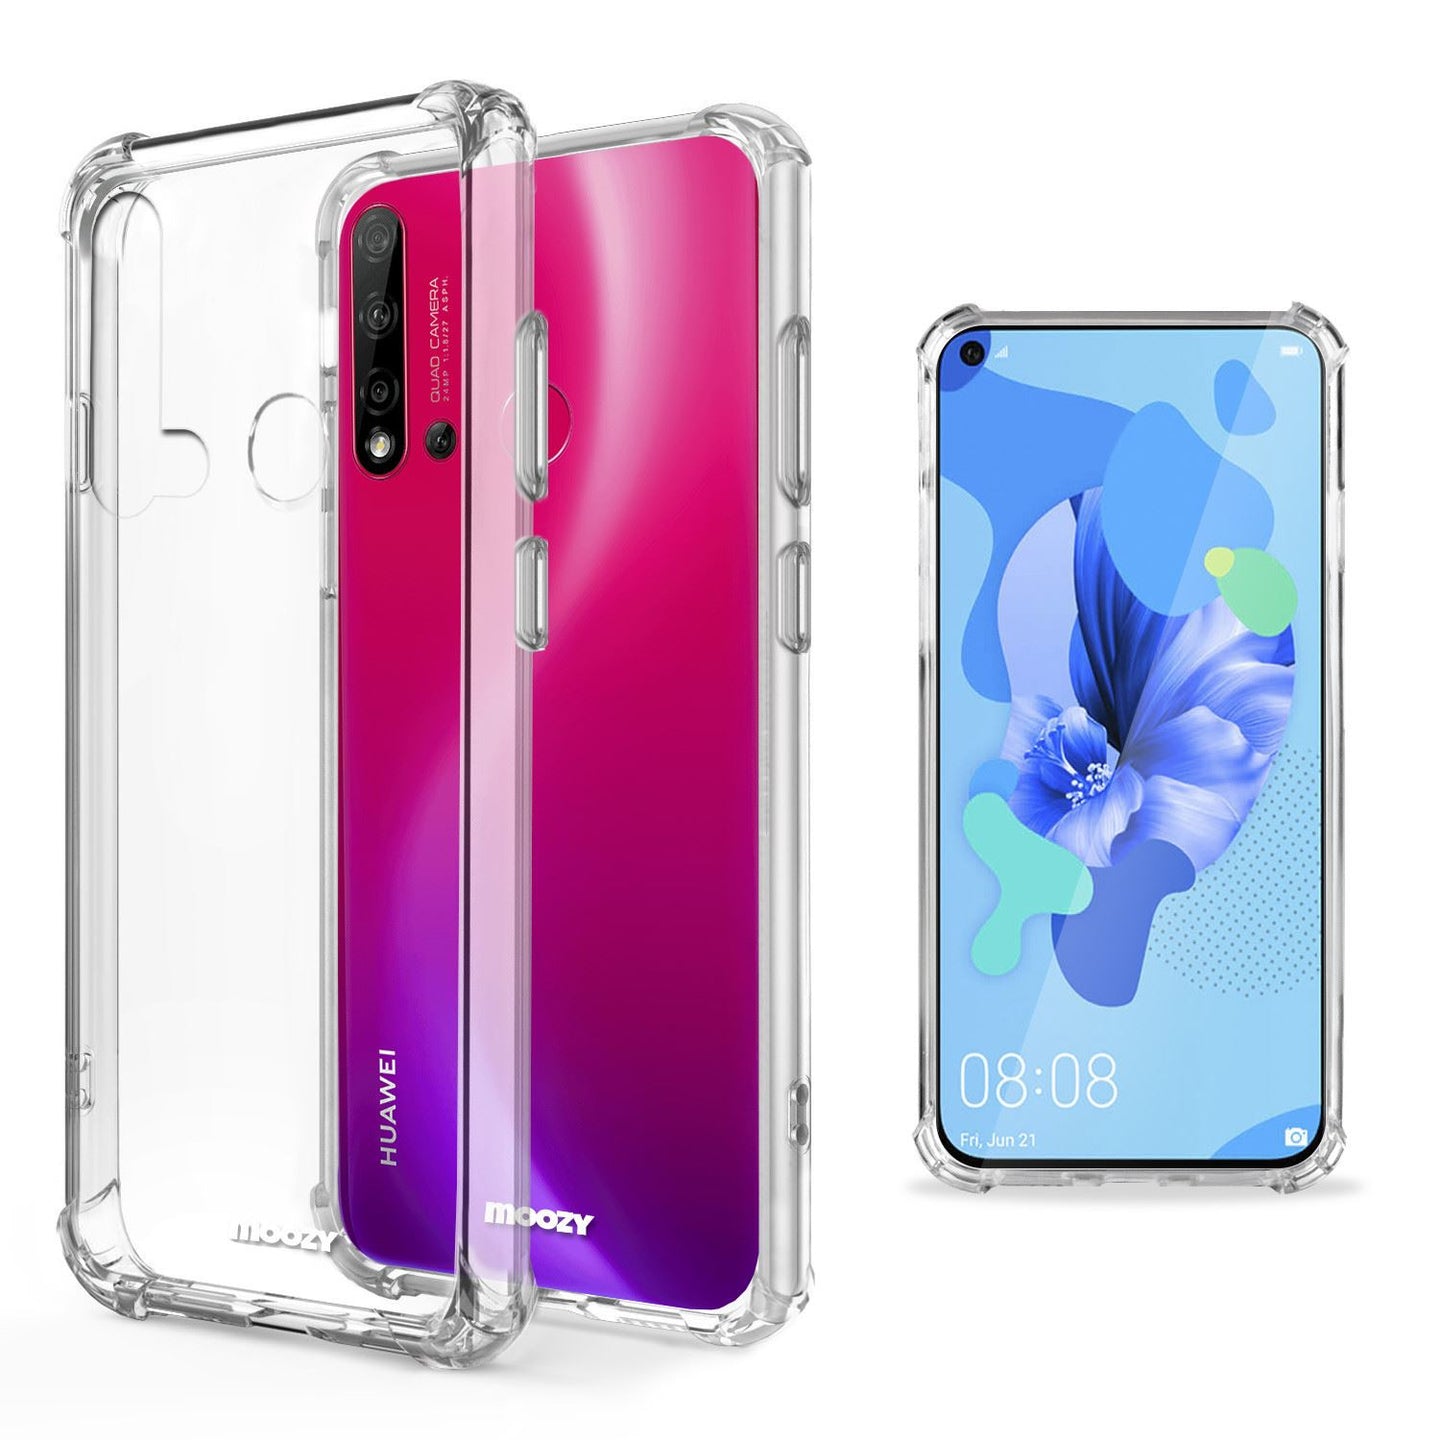 Moozy Shock Proof Silicone Case for Huawei P20 Lite 2019 - Transparent Crystal Clear Phone Case Soft TPU Cover